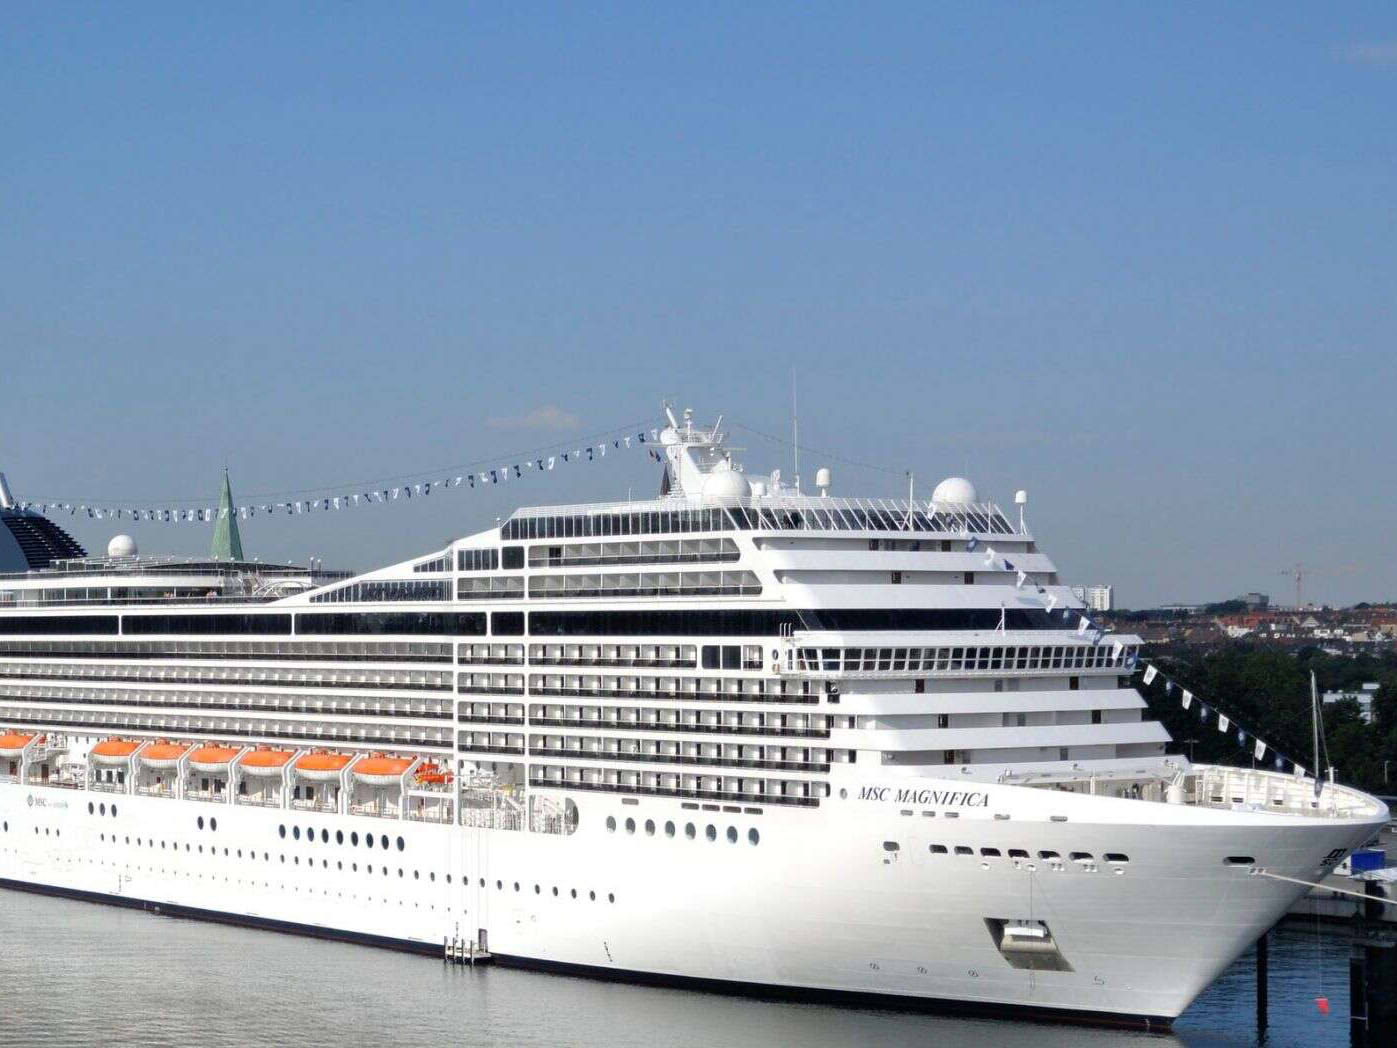 Cruises that orginally departed in January finally dock